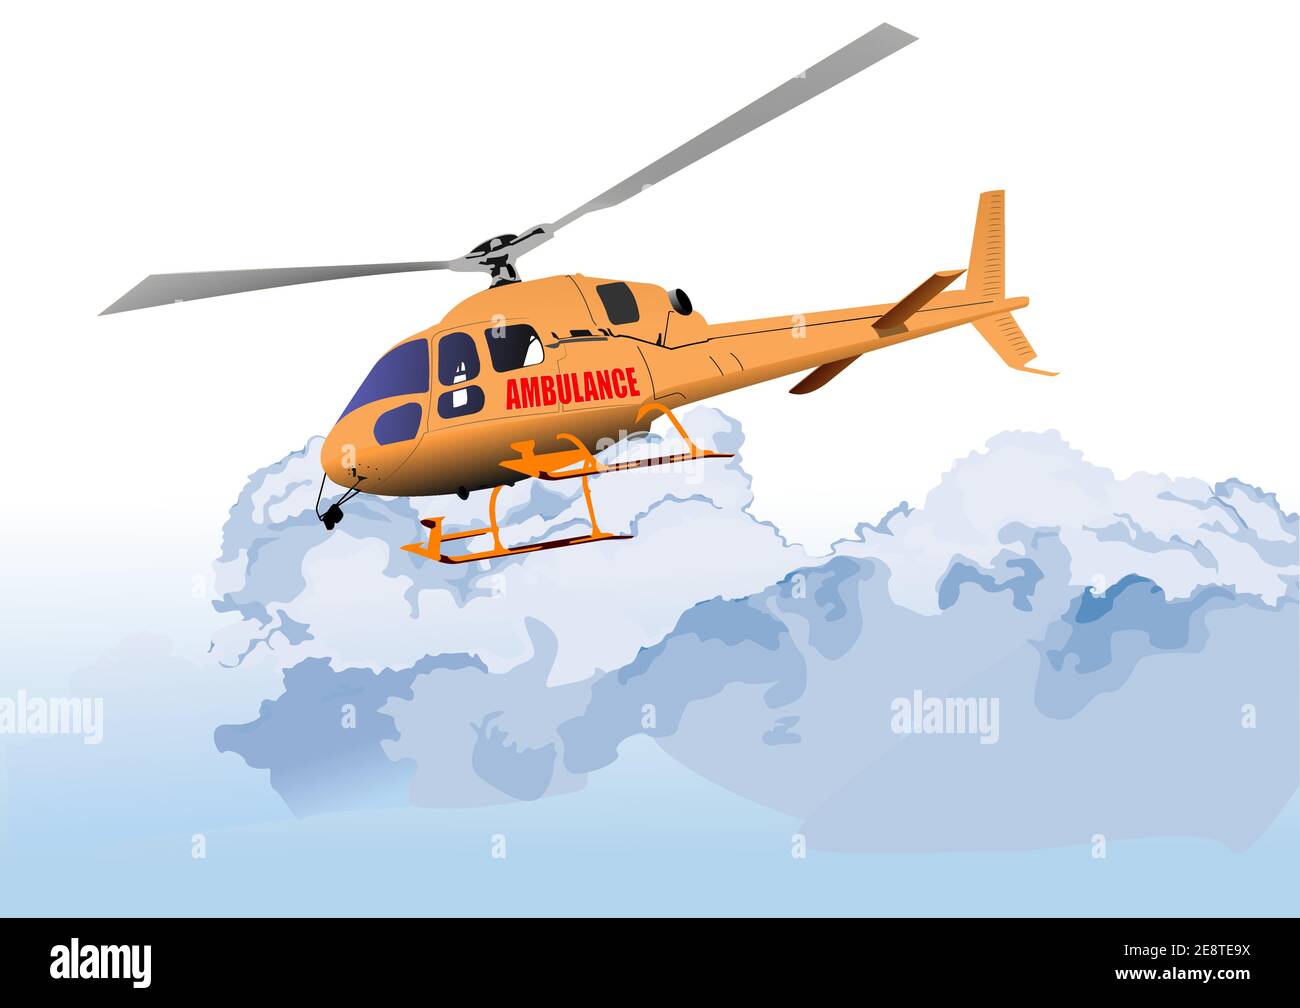 Ambulance or army helicopter. Vector illustration Stock Vector